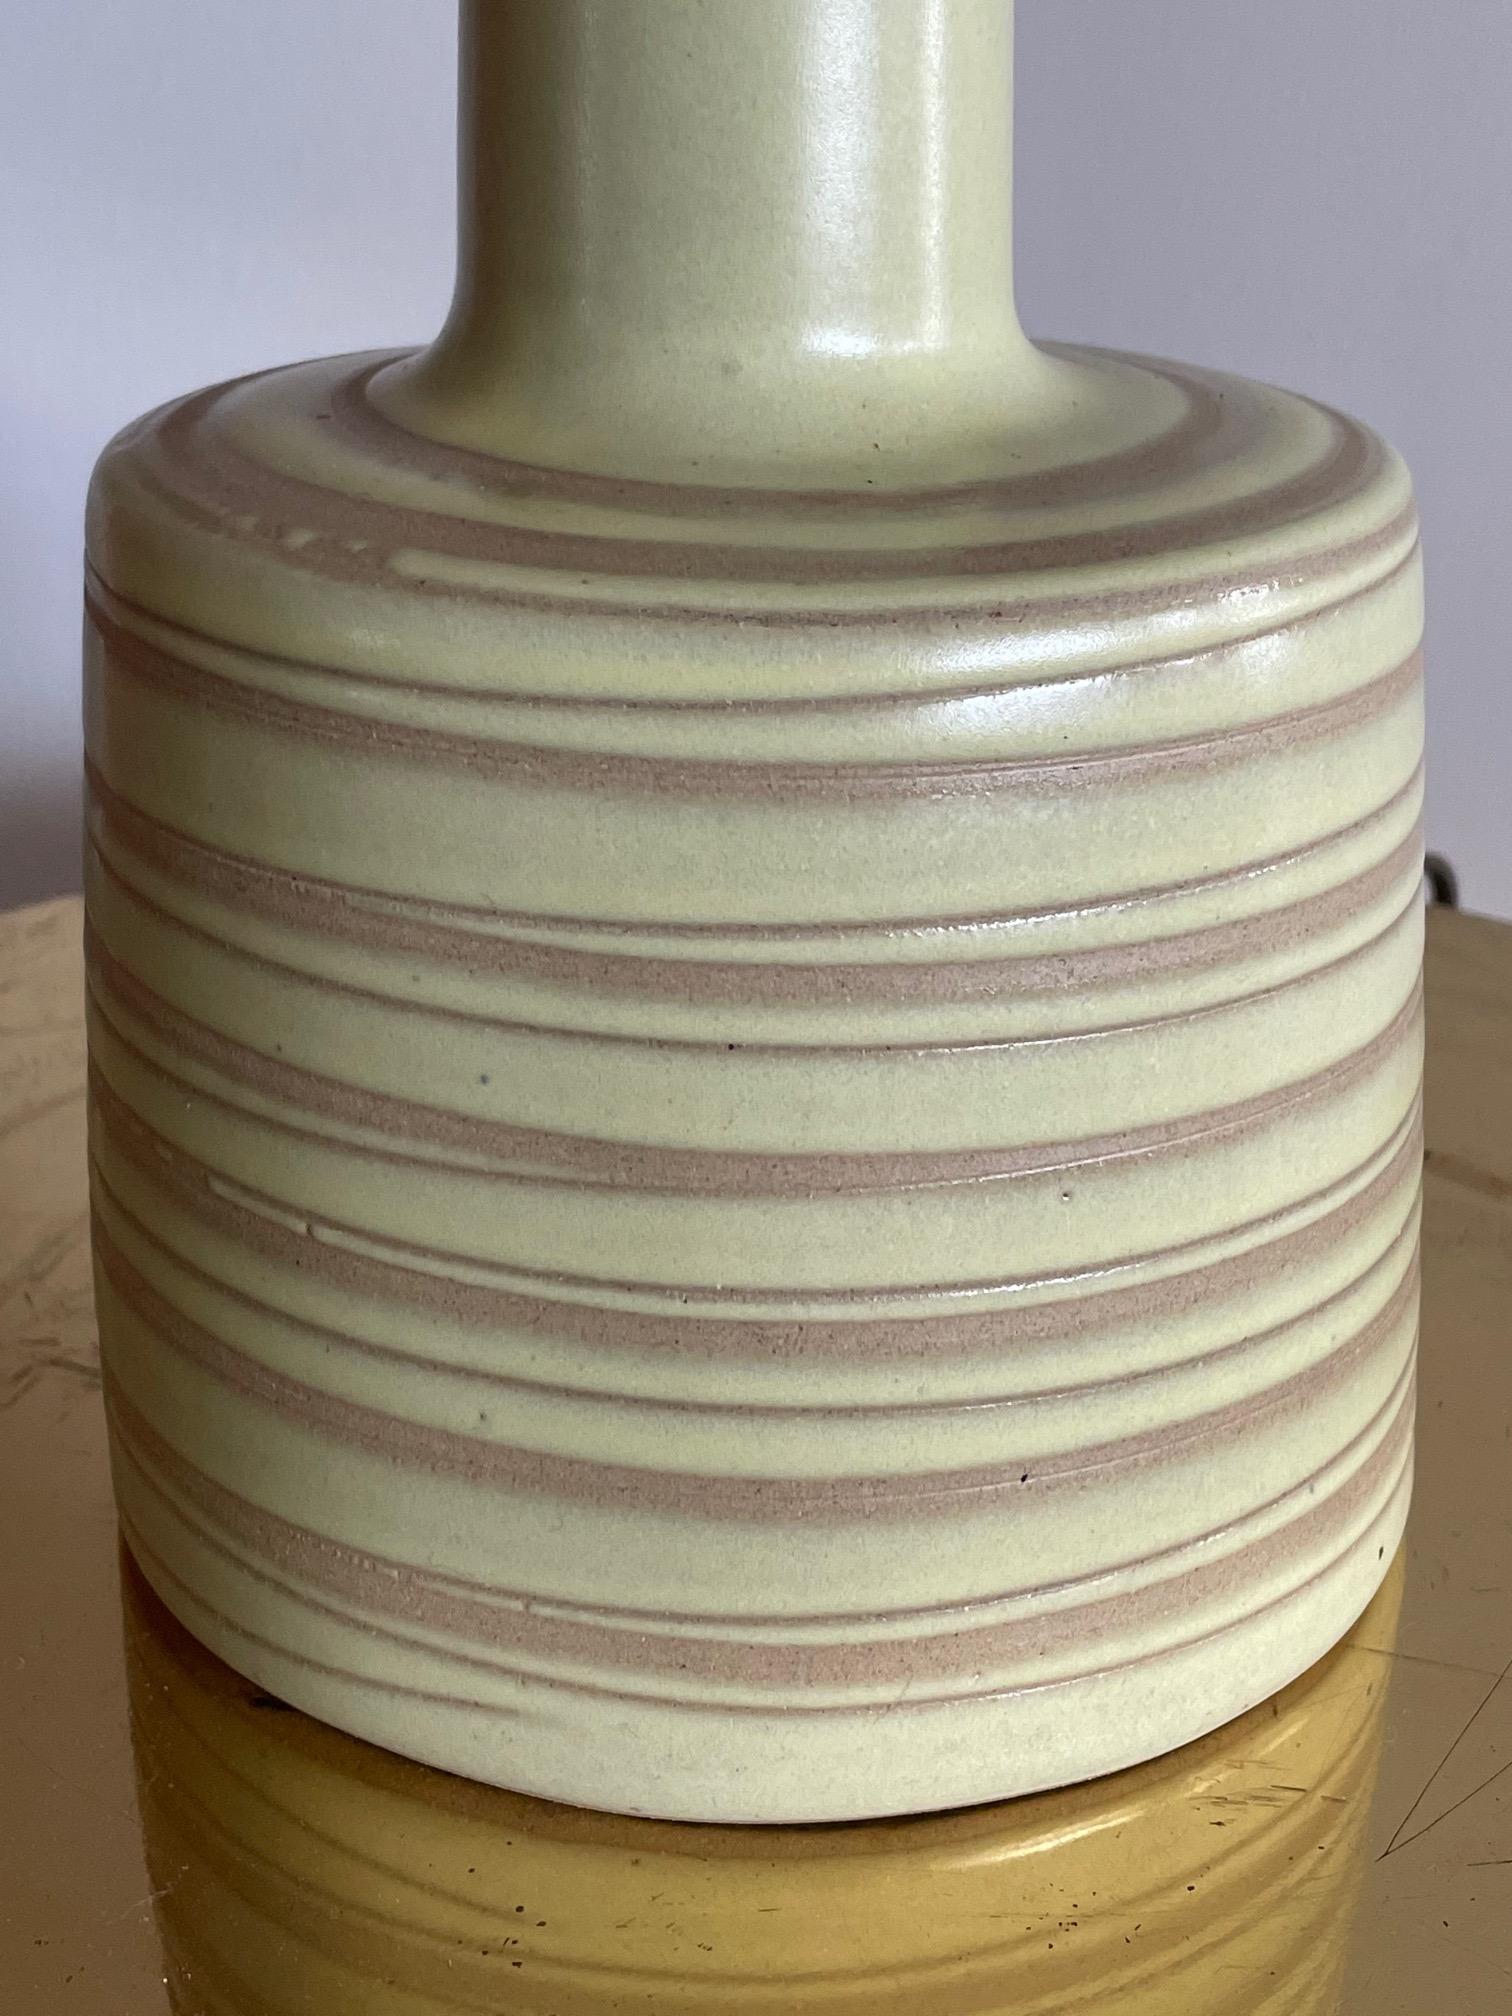 A charming ceramic lamp by Martz, circa 1960s. Yellow/beige with a swirling line decoration.